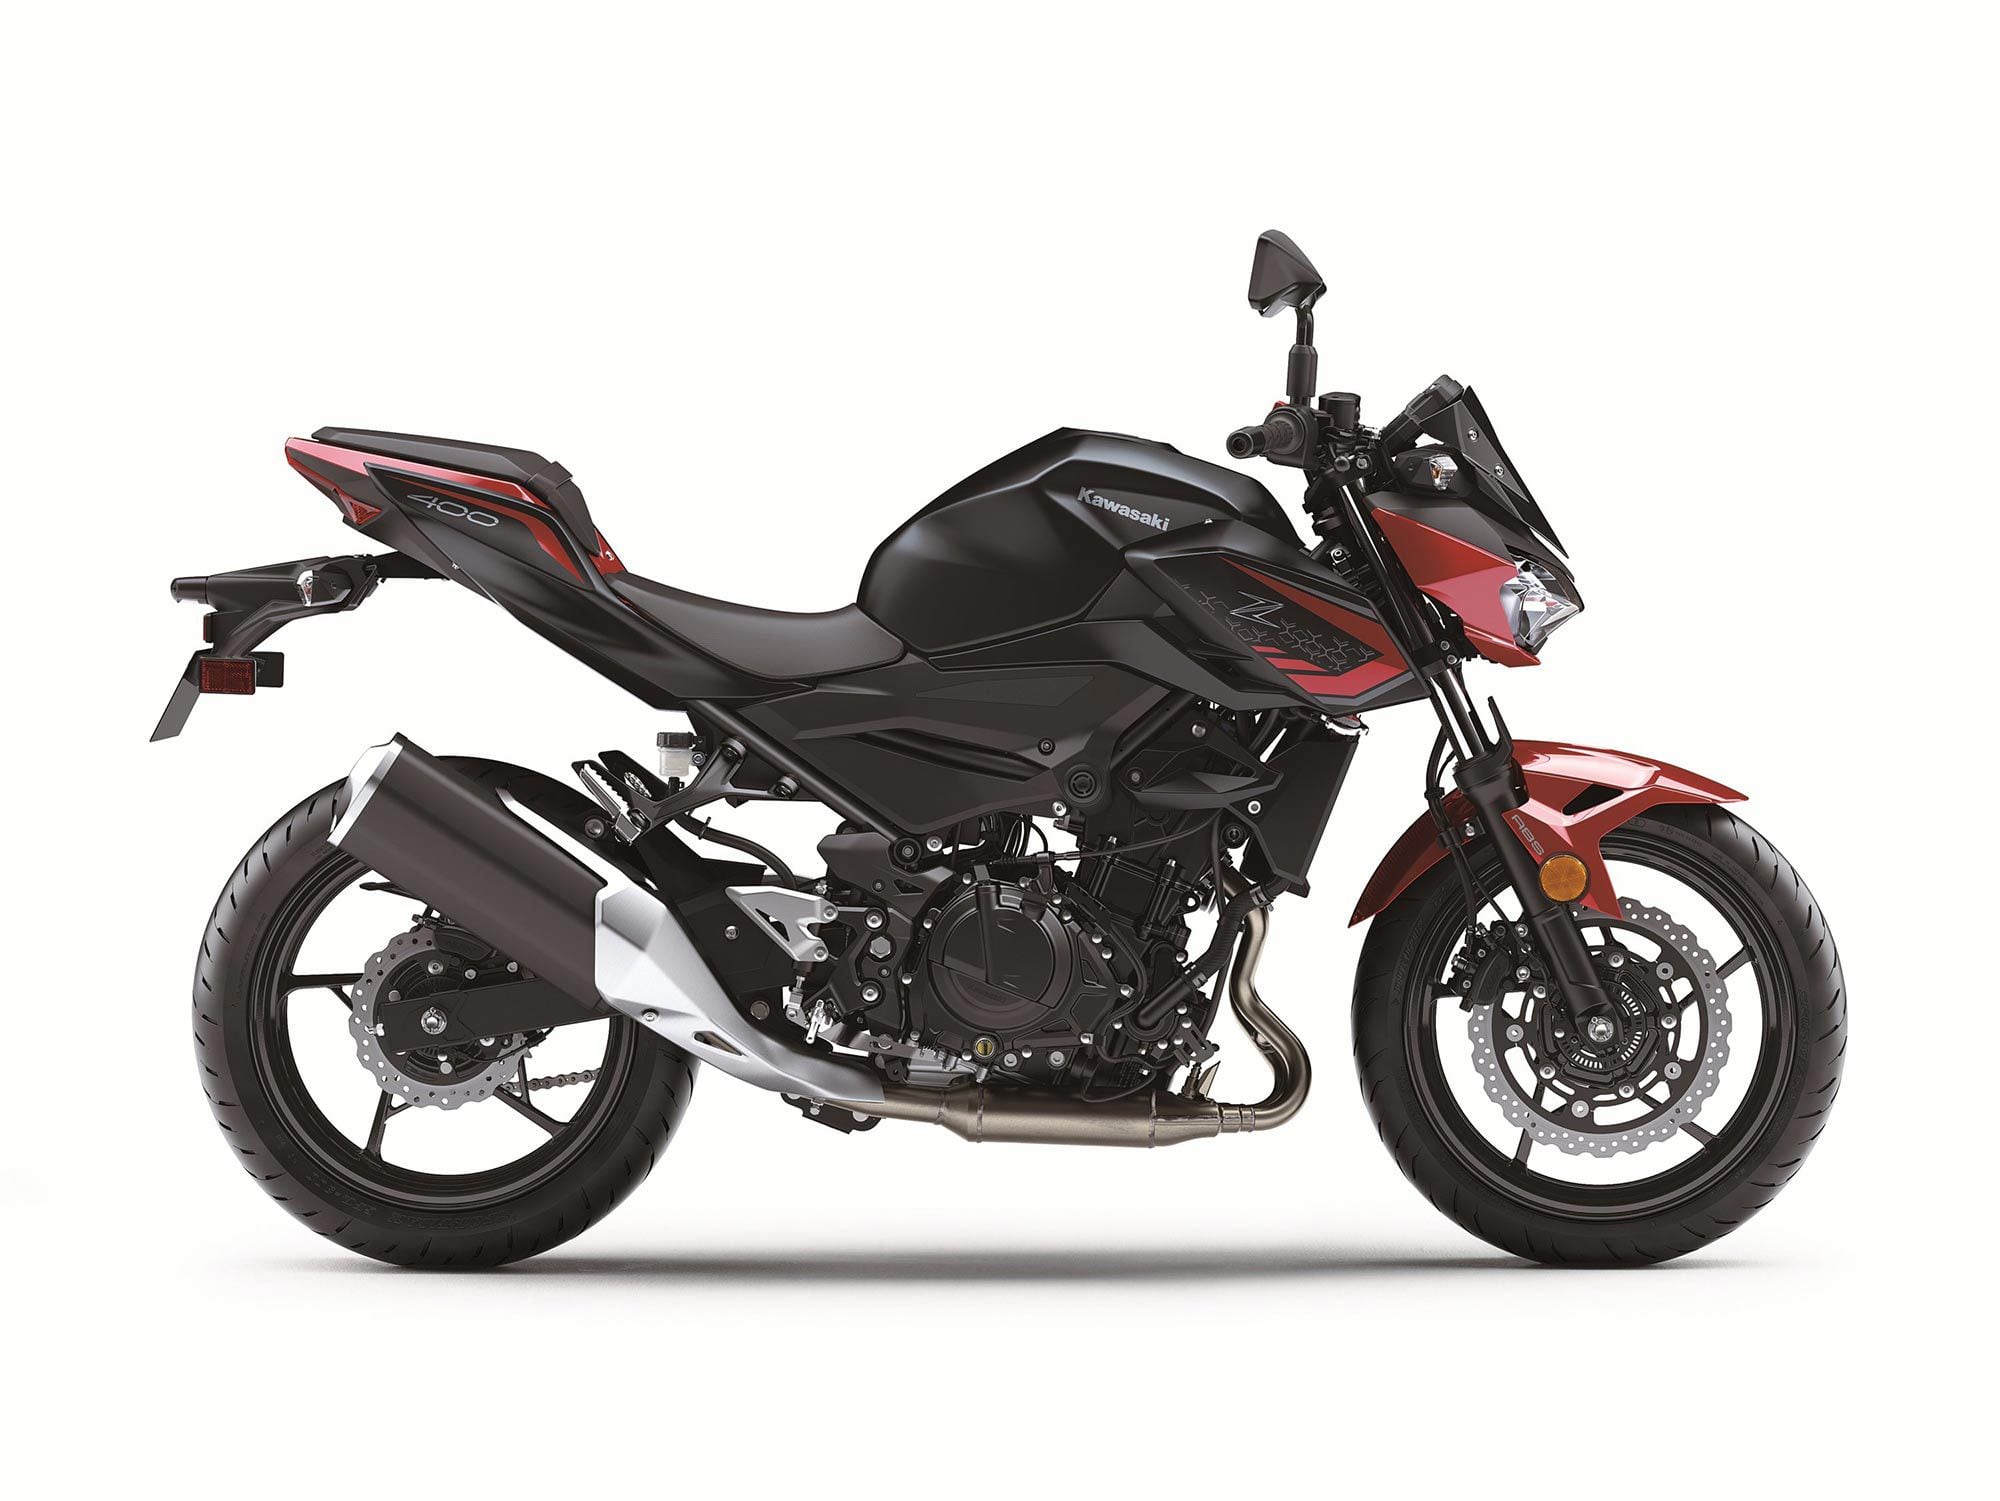 Ikke moderigtigt handling fattigdom 2021 Kawasaki Z400 ABS Buyer's Guide: Specs, Photos, Price | Cycle World